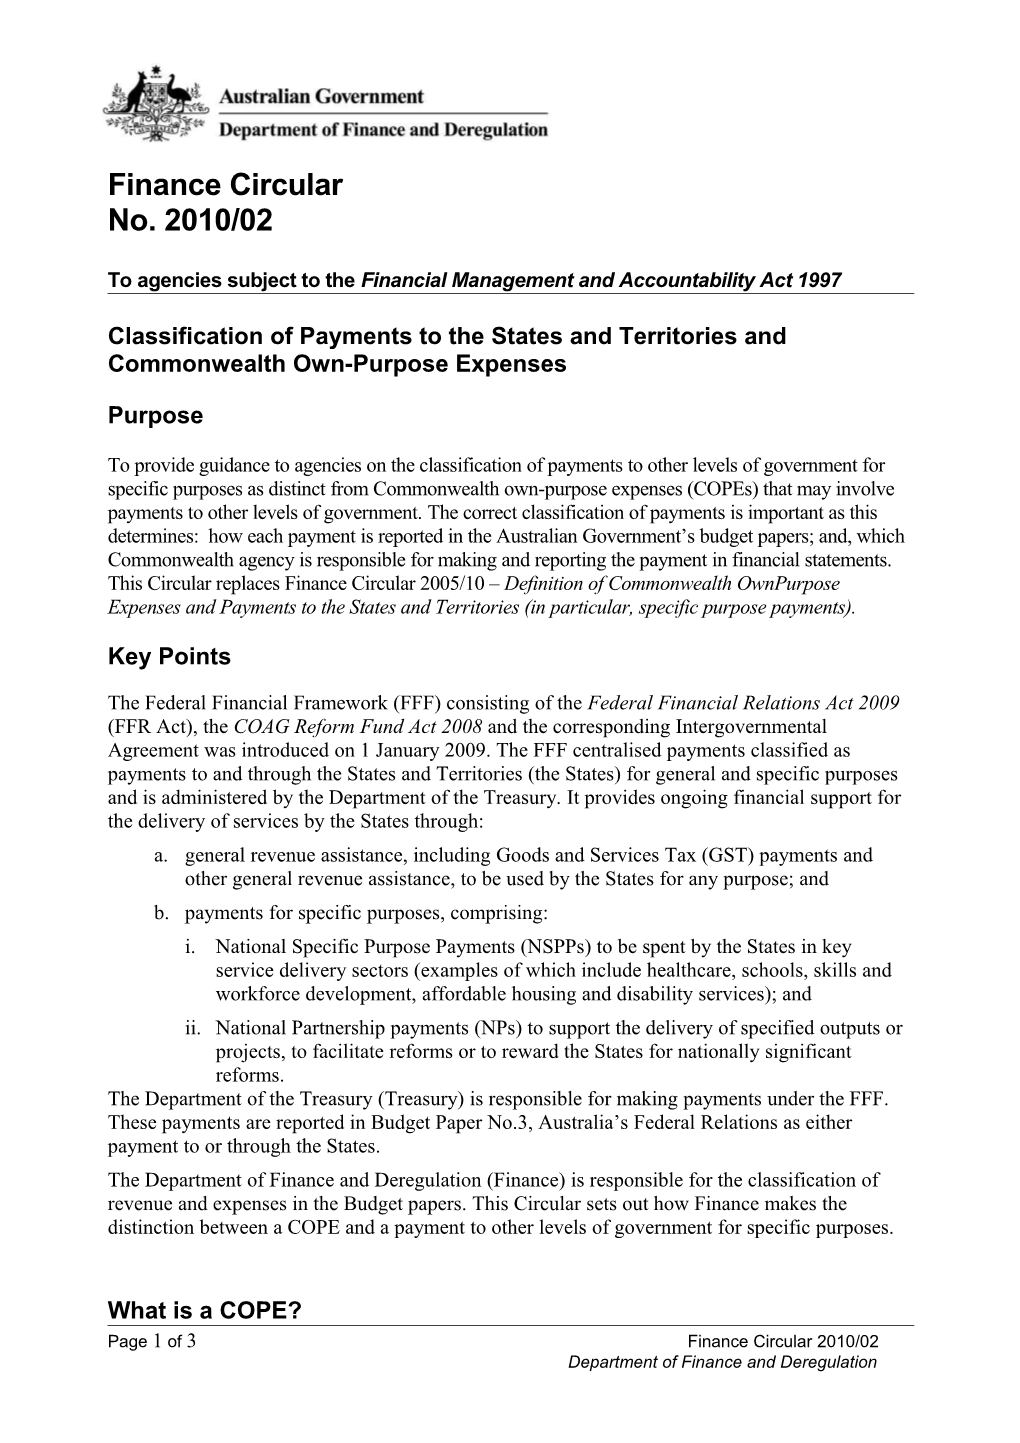 Finance Circular 2010/02 - Classification of Payments to the States and Territories And